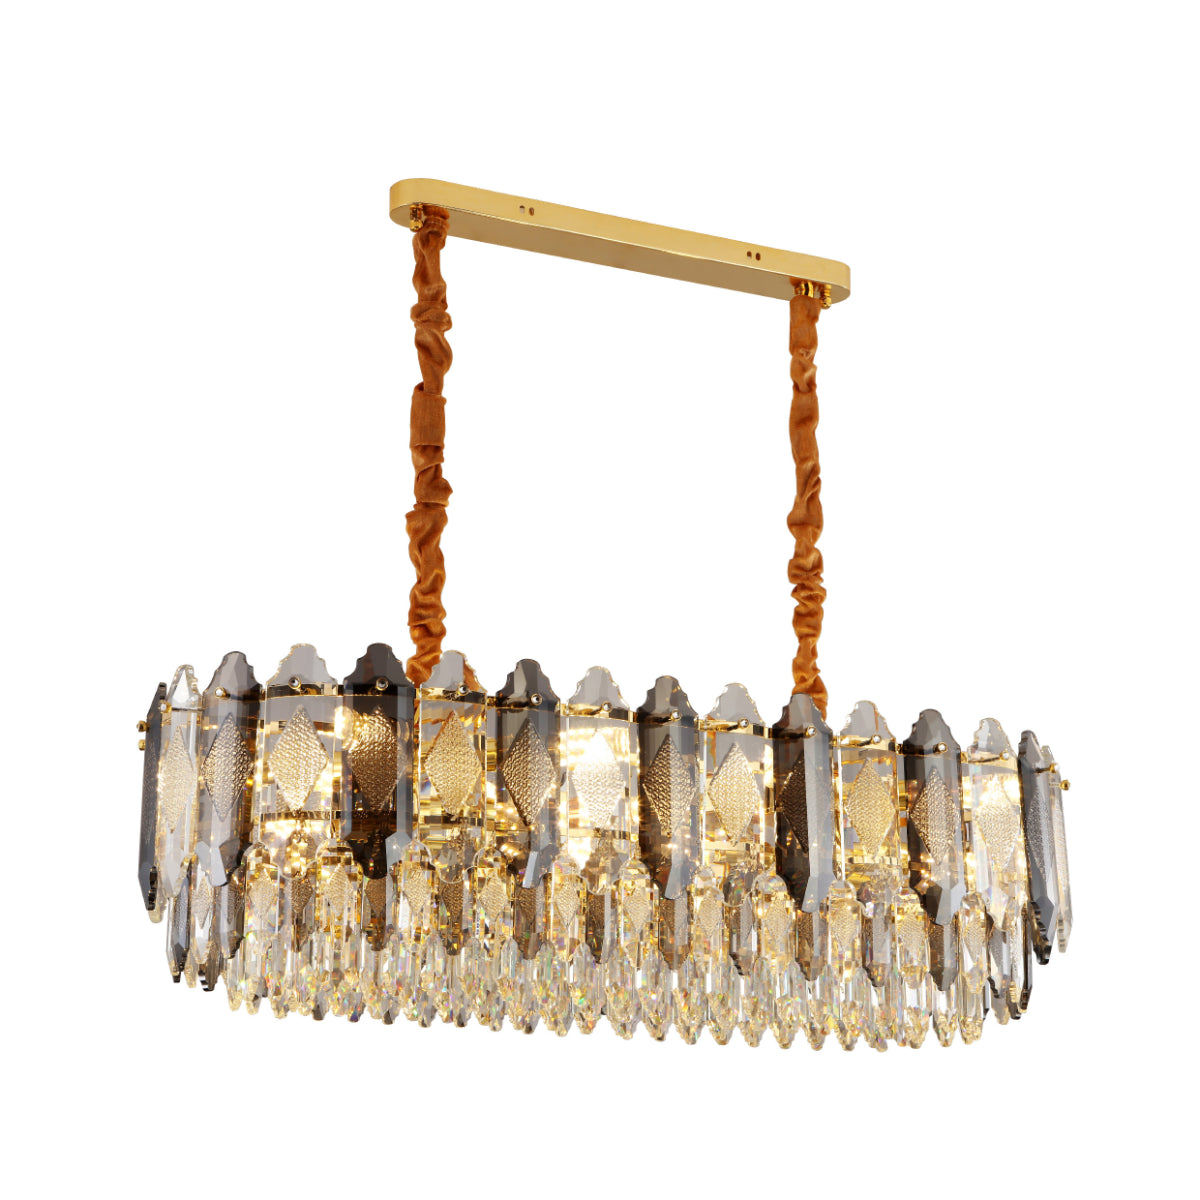 Main image of Deluxe Smoky Clear Crystal Modern Chandelier Light Gold | TEKLED  159-18005